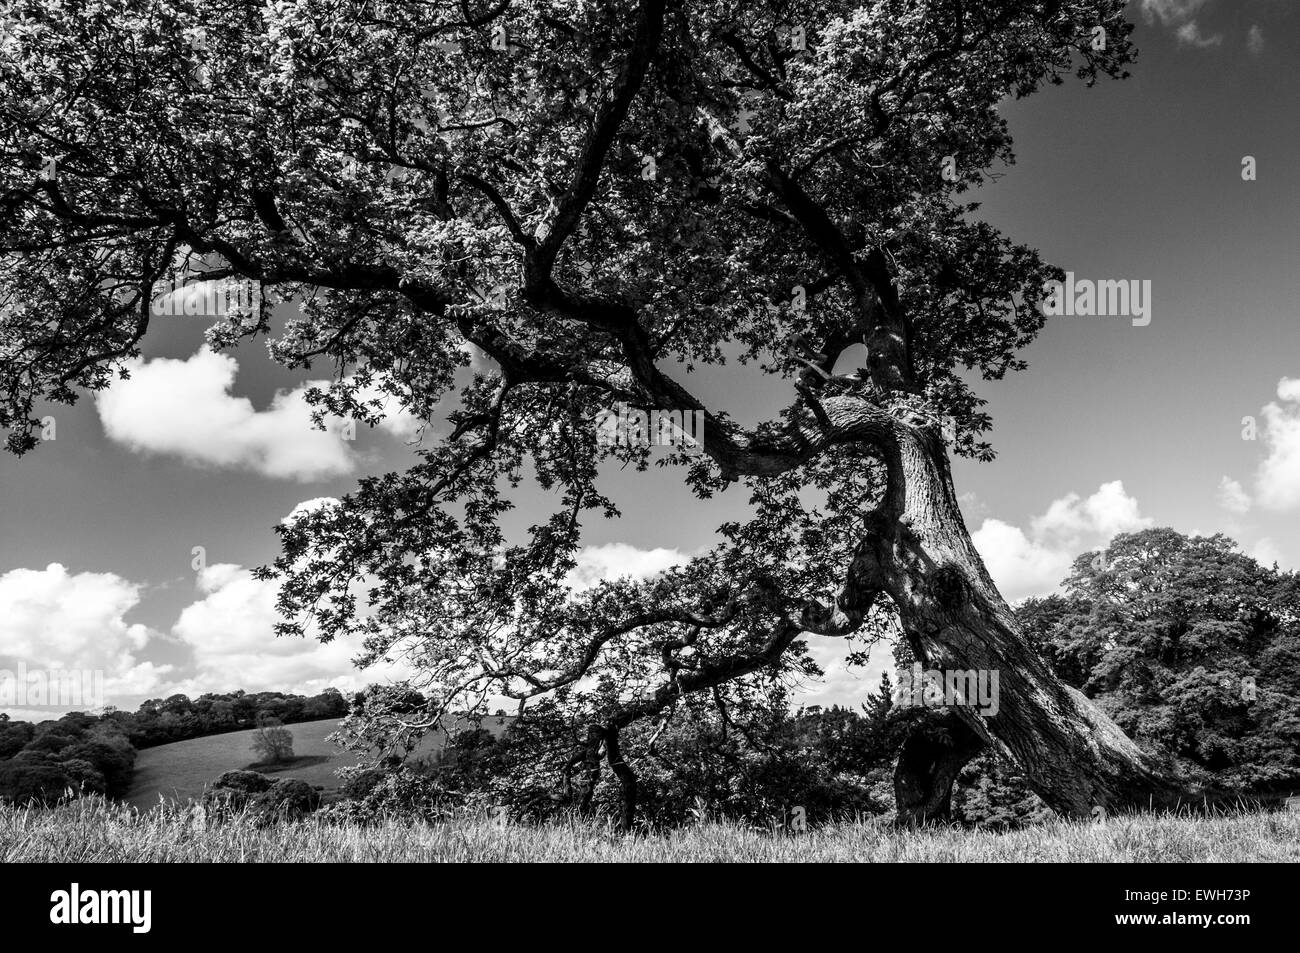 Mature tree in the English countryside in black and white. Stock Photo